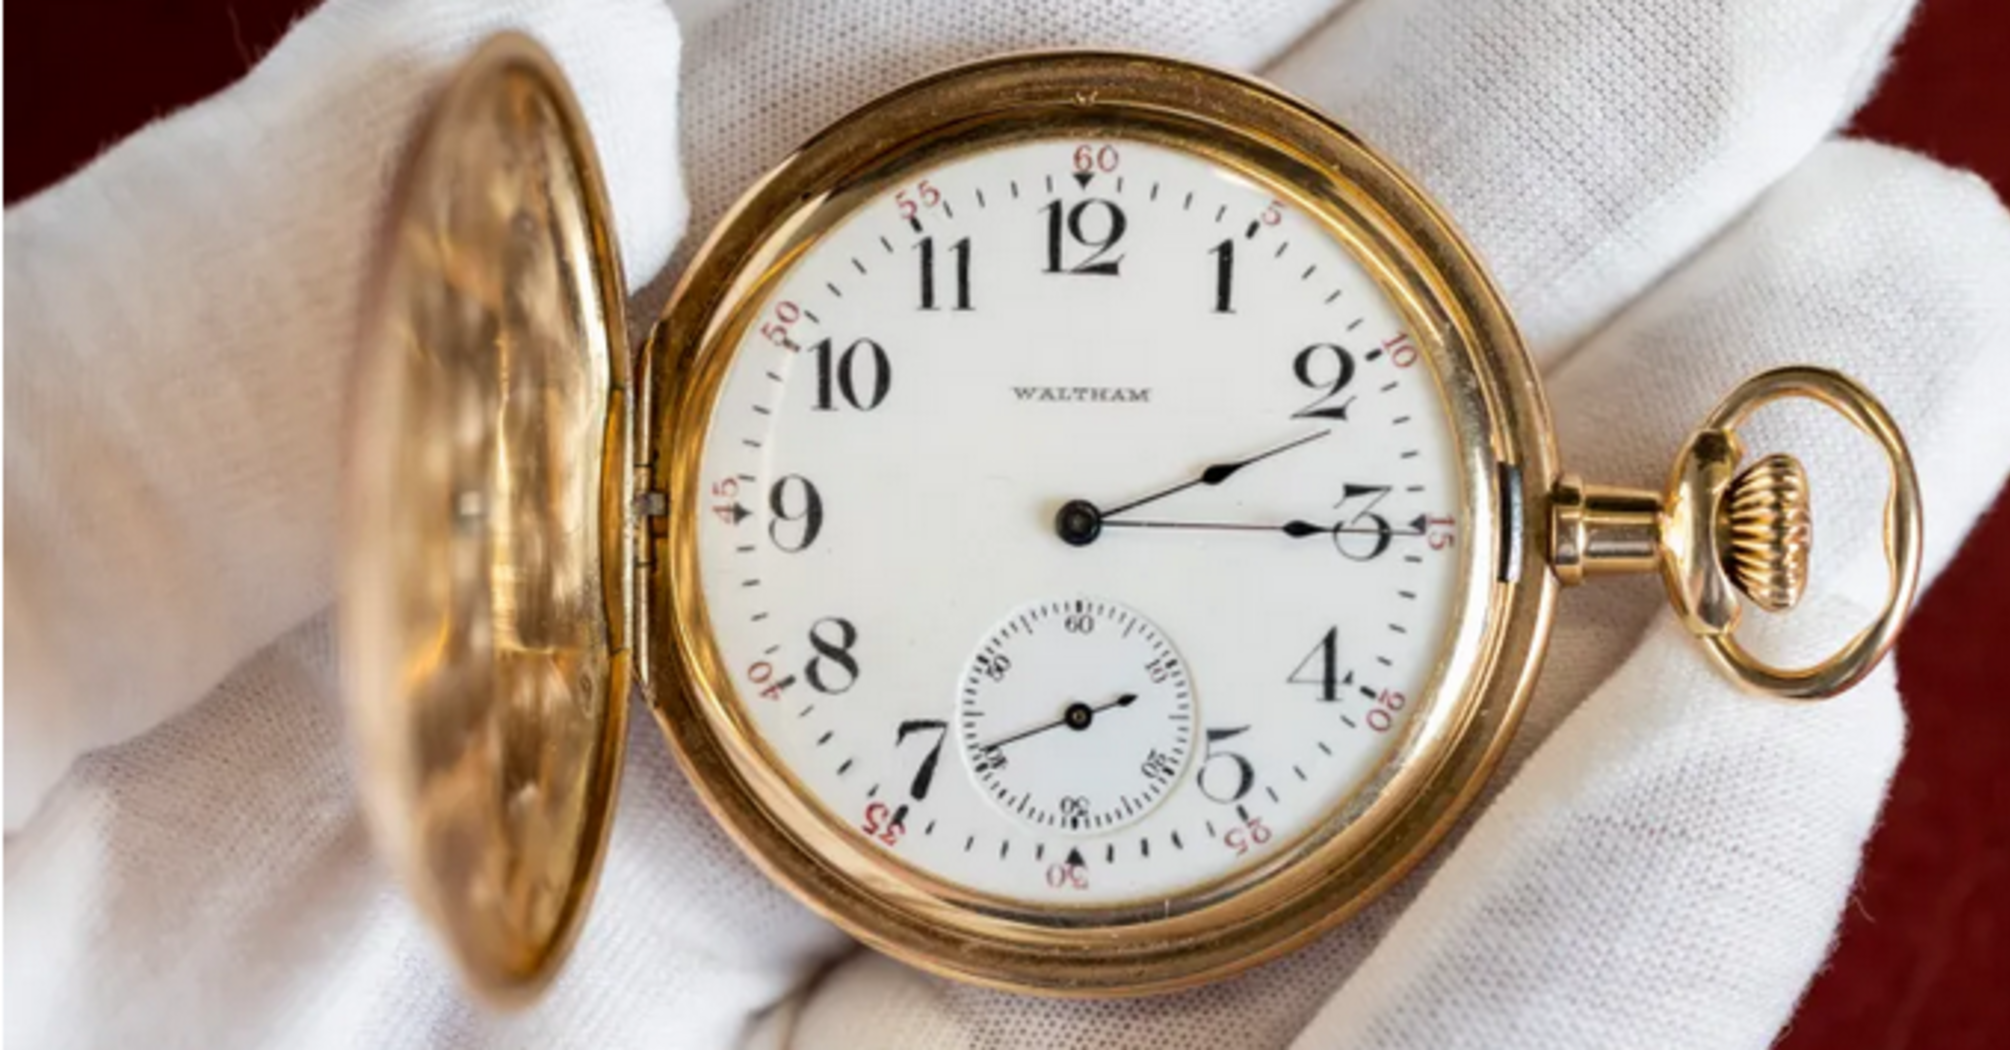 The watch of the richest passenger on the Titanic has been sold for record money: